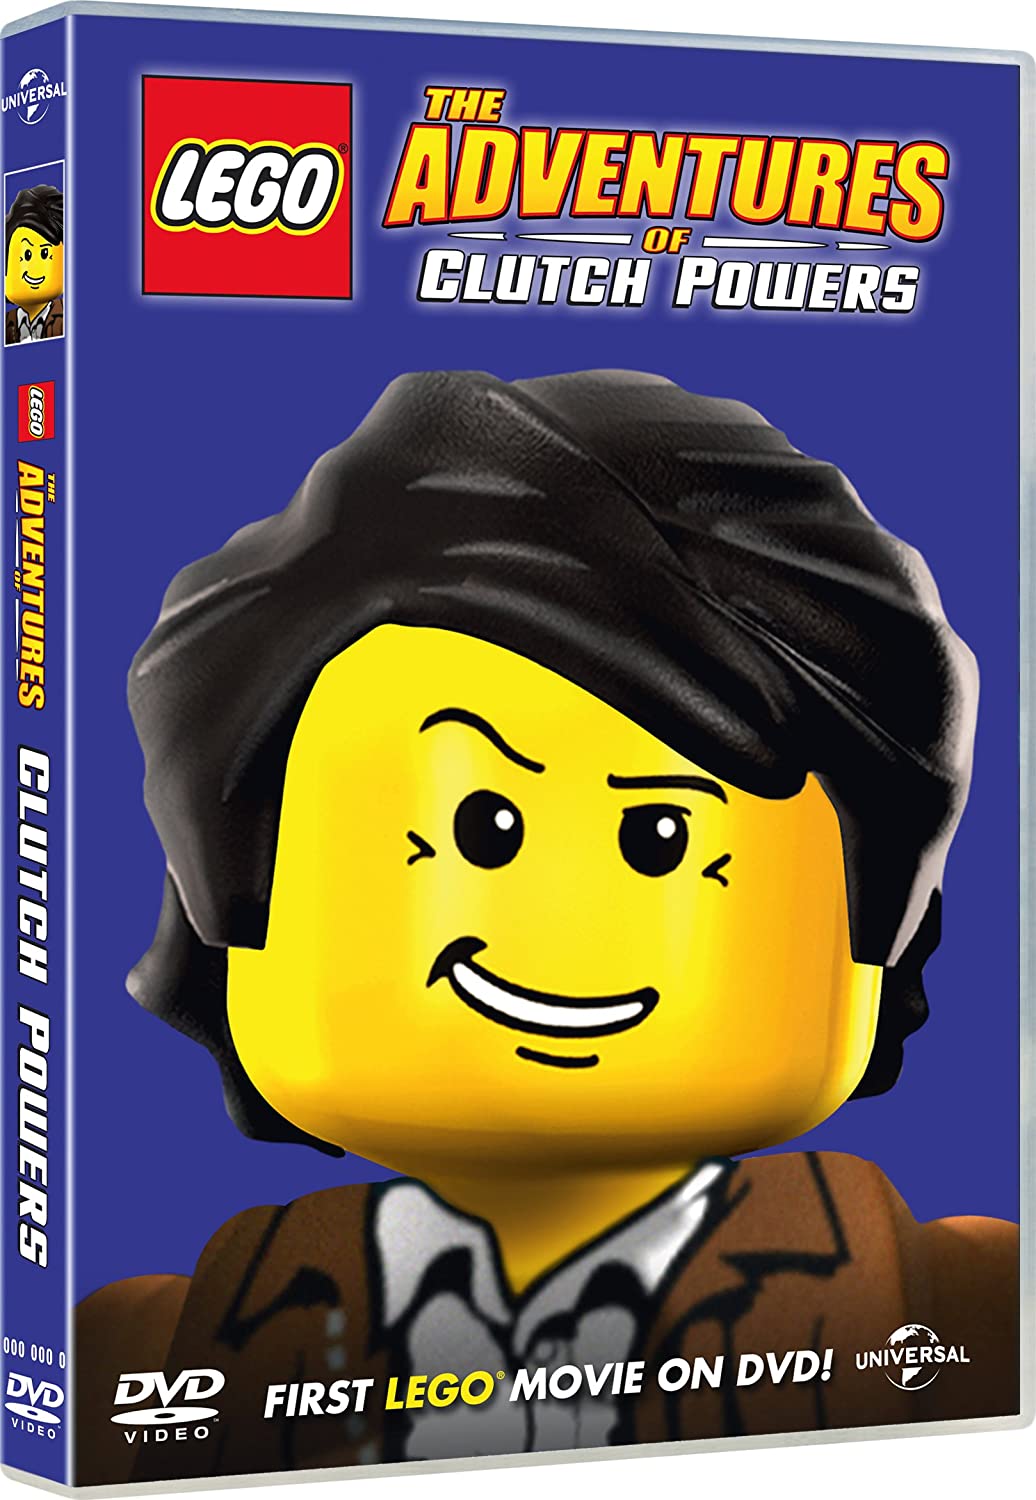 Lego: The Adventures Of Clutch Powers - Adventure/Family [DVD]